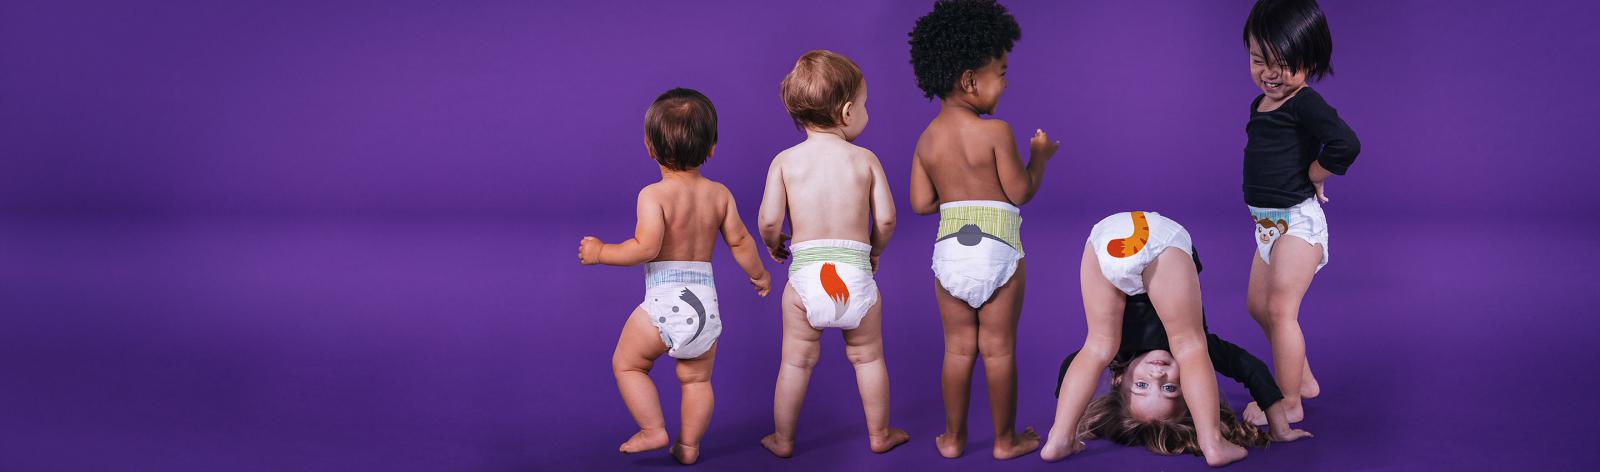 Cuties complete care diapers lifestyle image